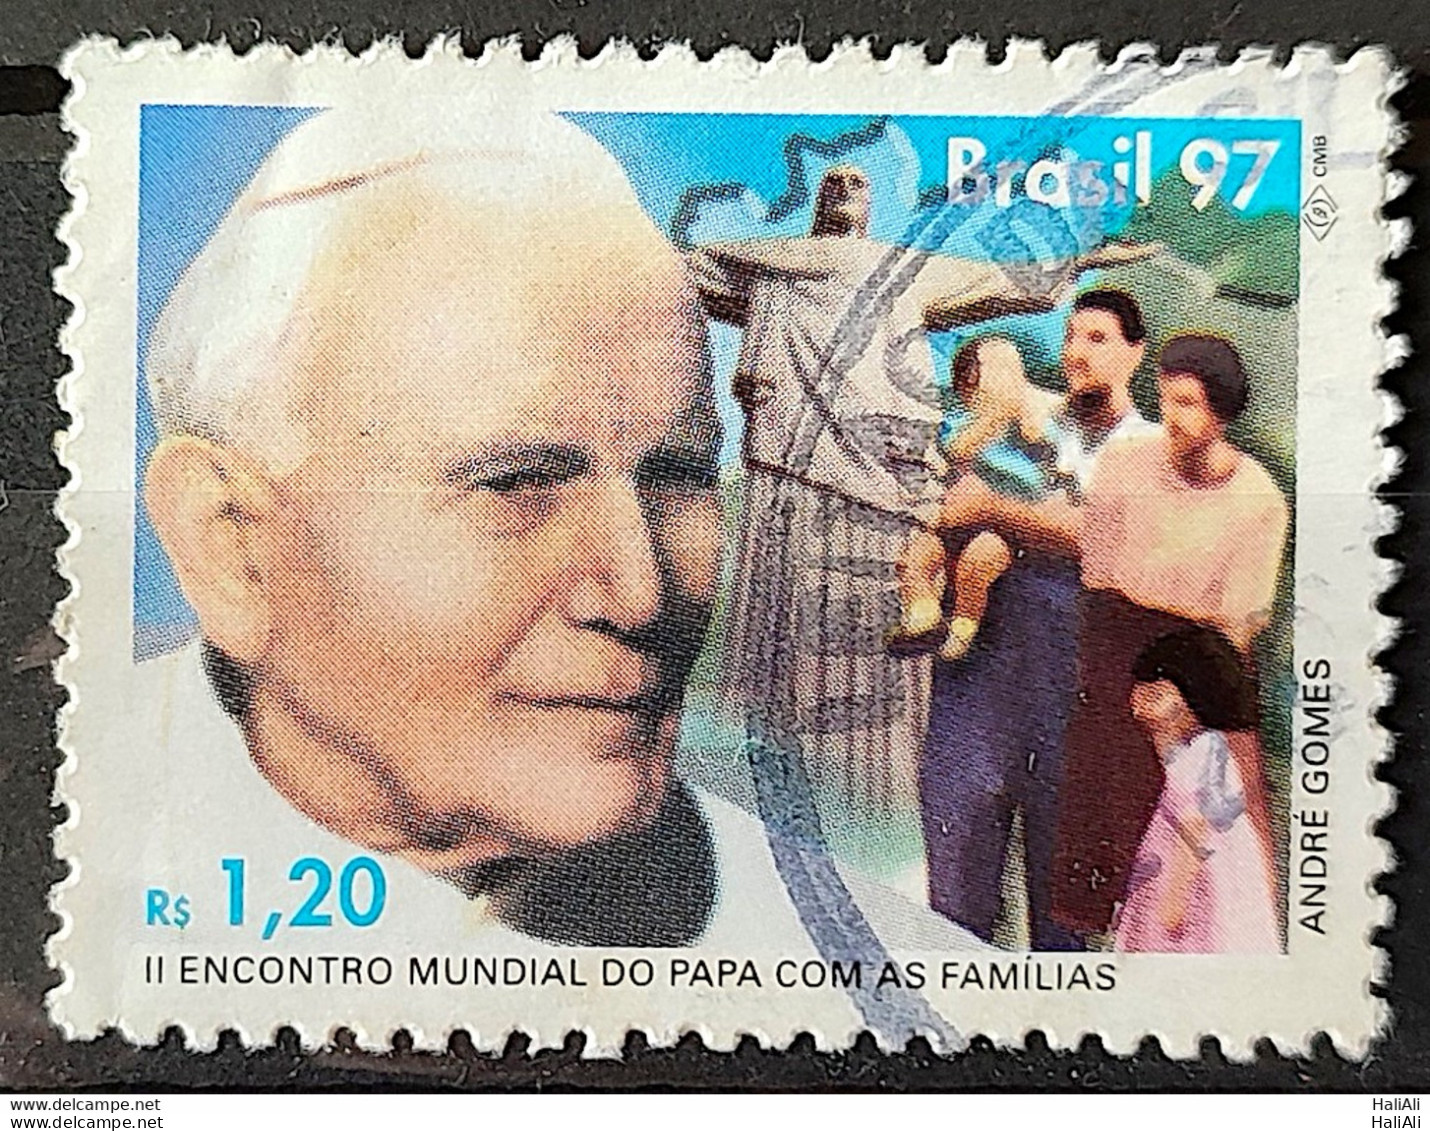 C 2043 Brazil Stamp World Pope Meeting With Families Religion 1997 Circulated 8 - Oblitérés